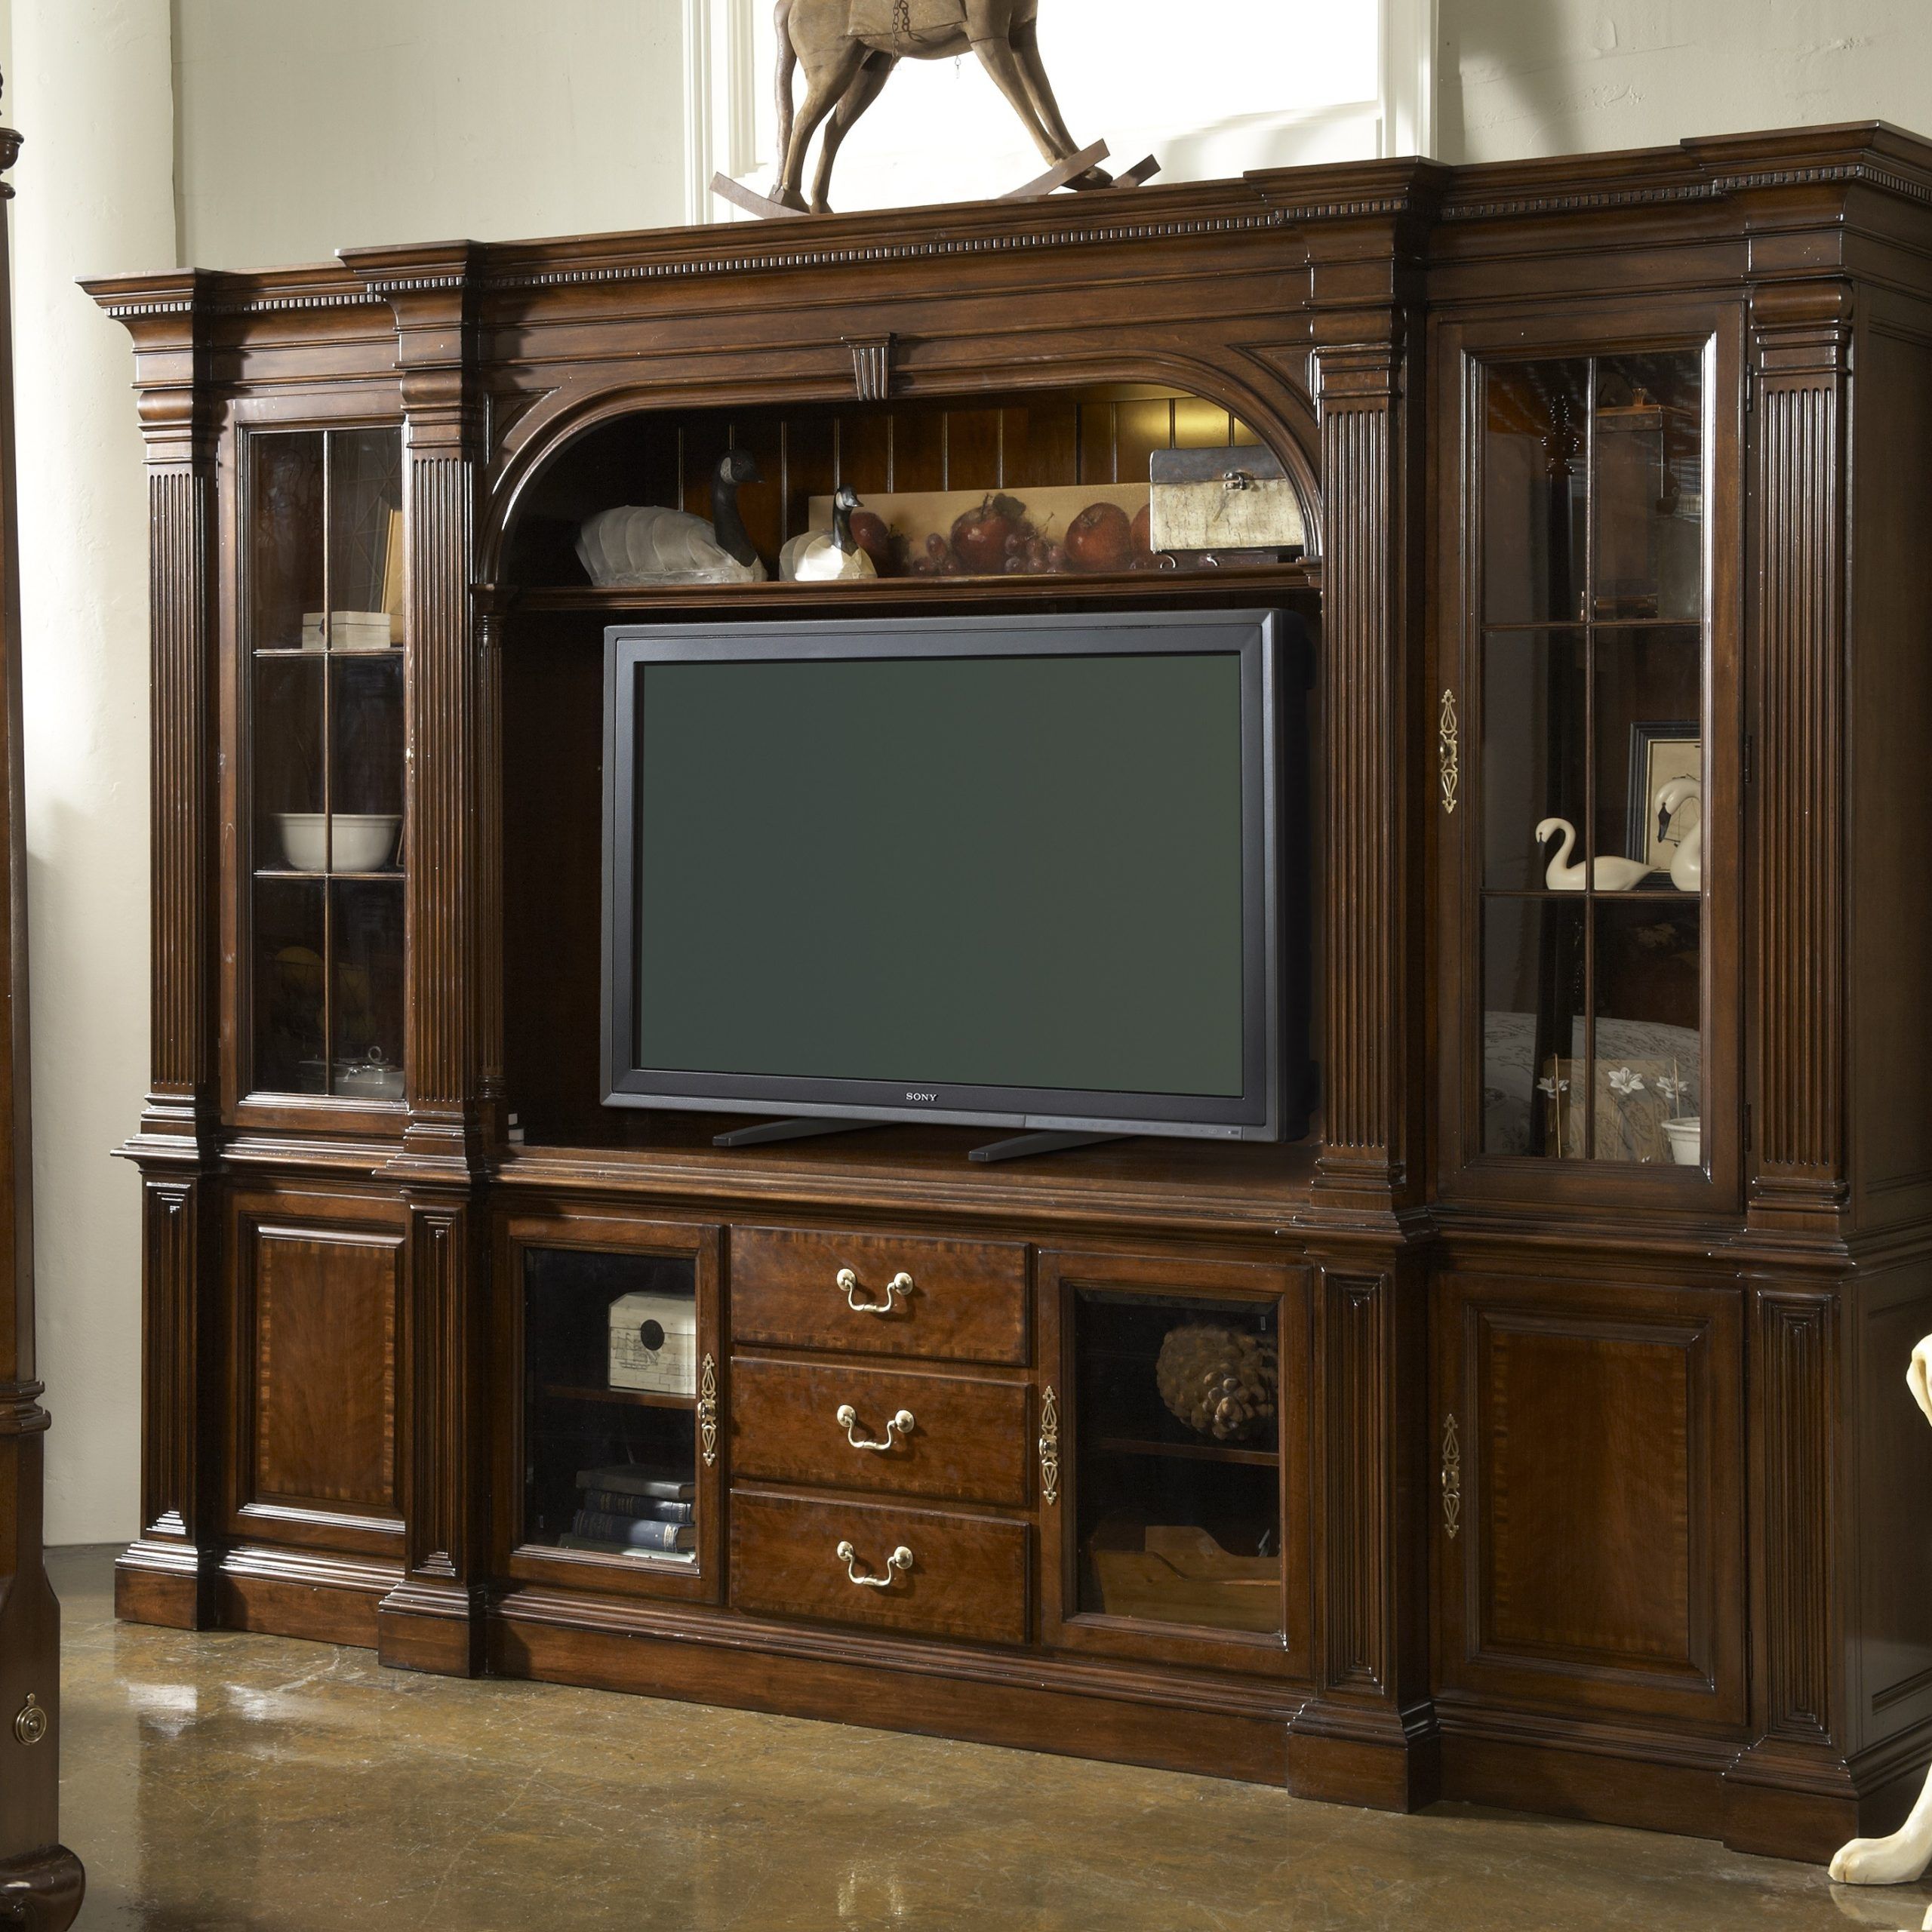 Cherry Wood Entertainment Center | Homesfeed Within Wide Entertainment Centers (Gallery 17 of 20)